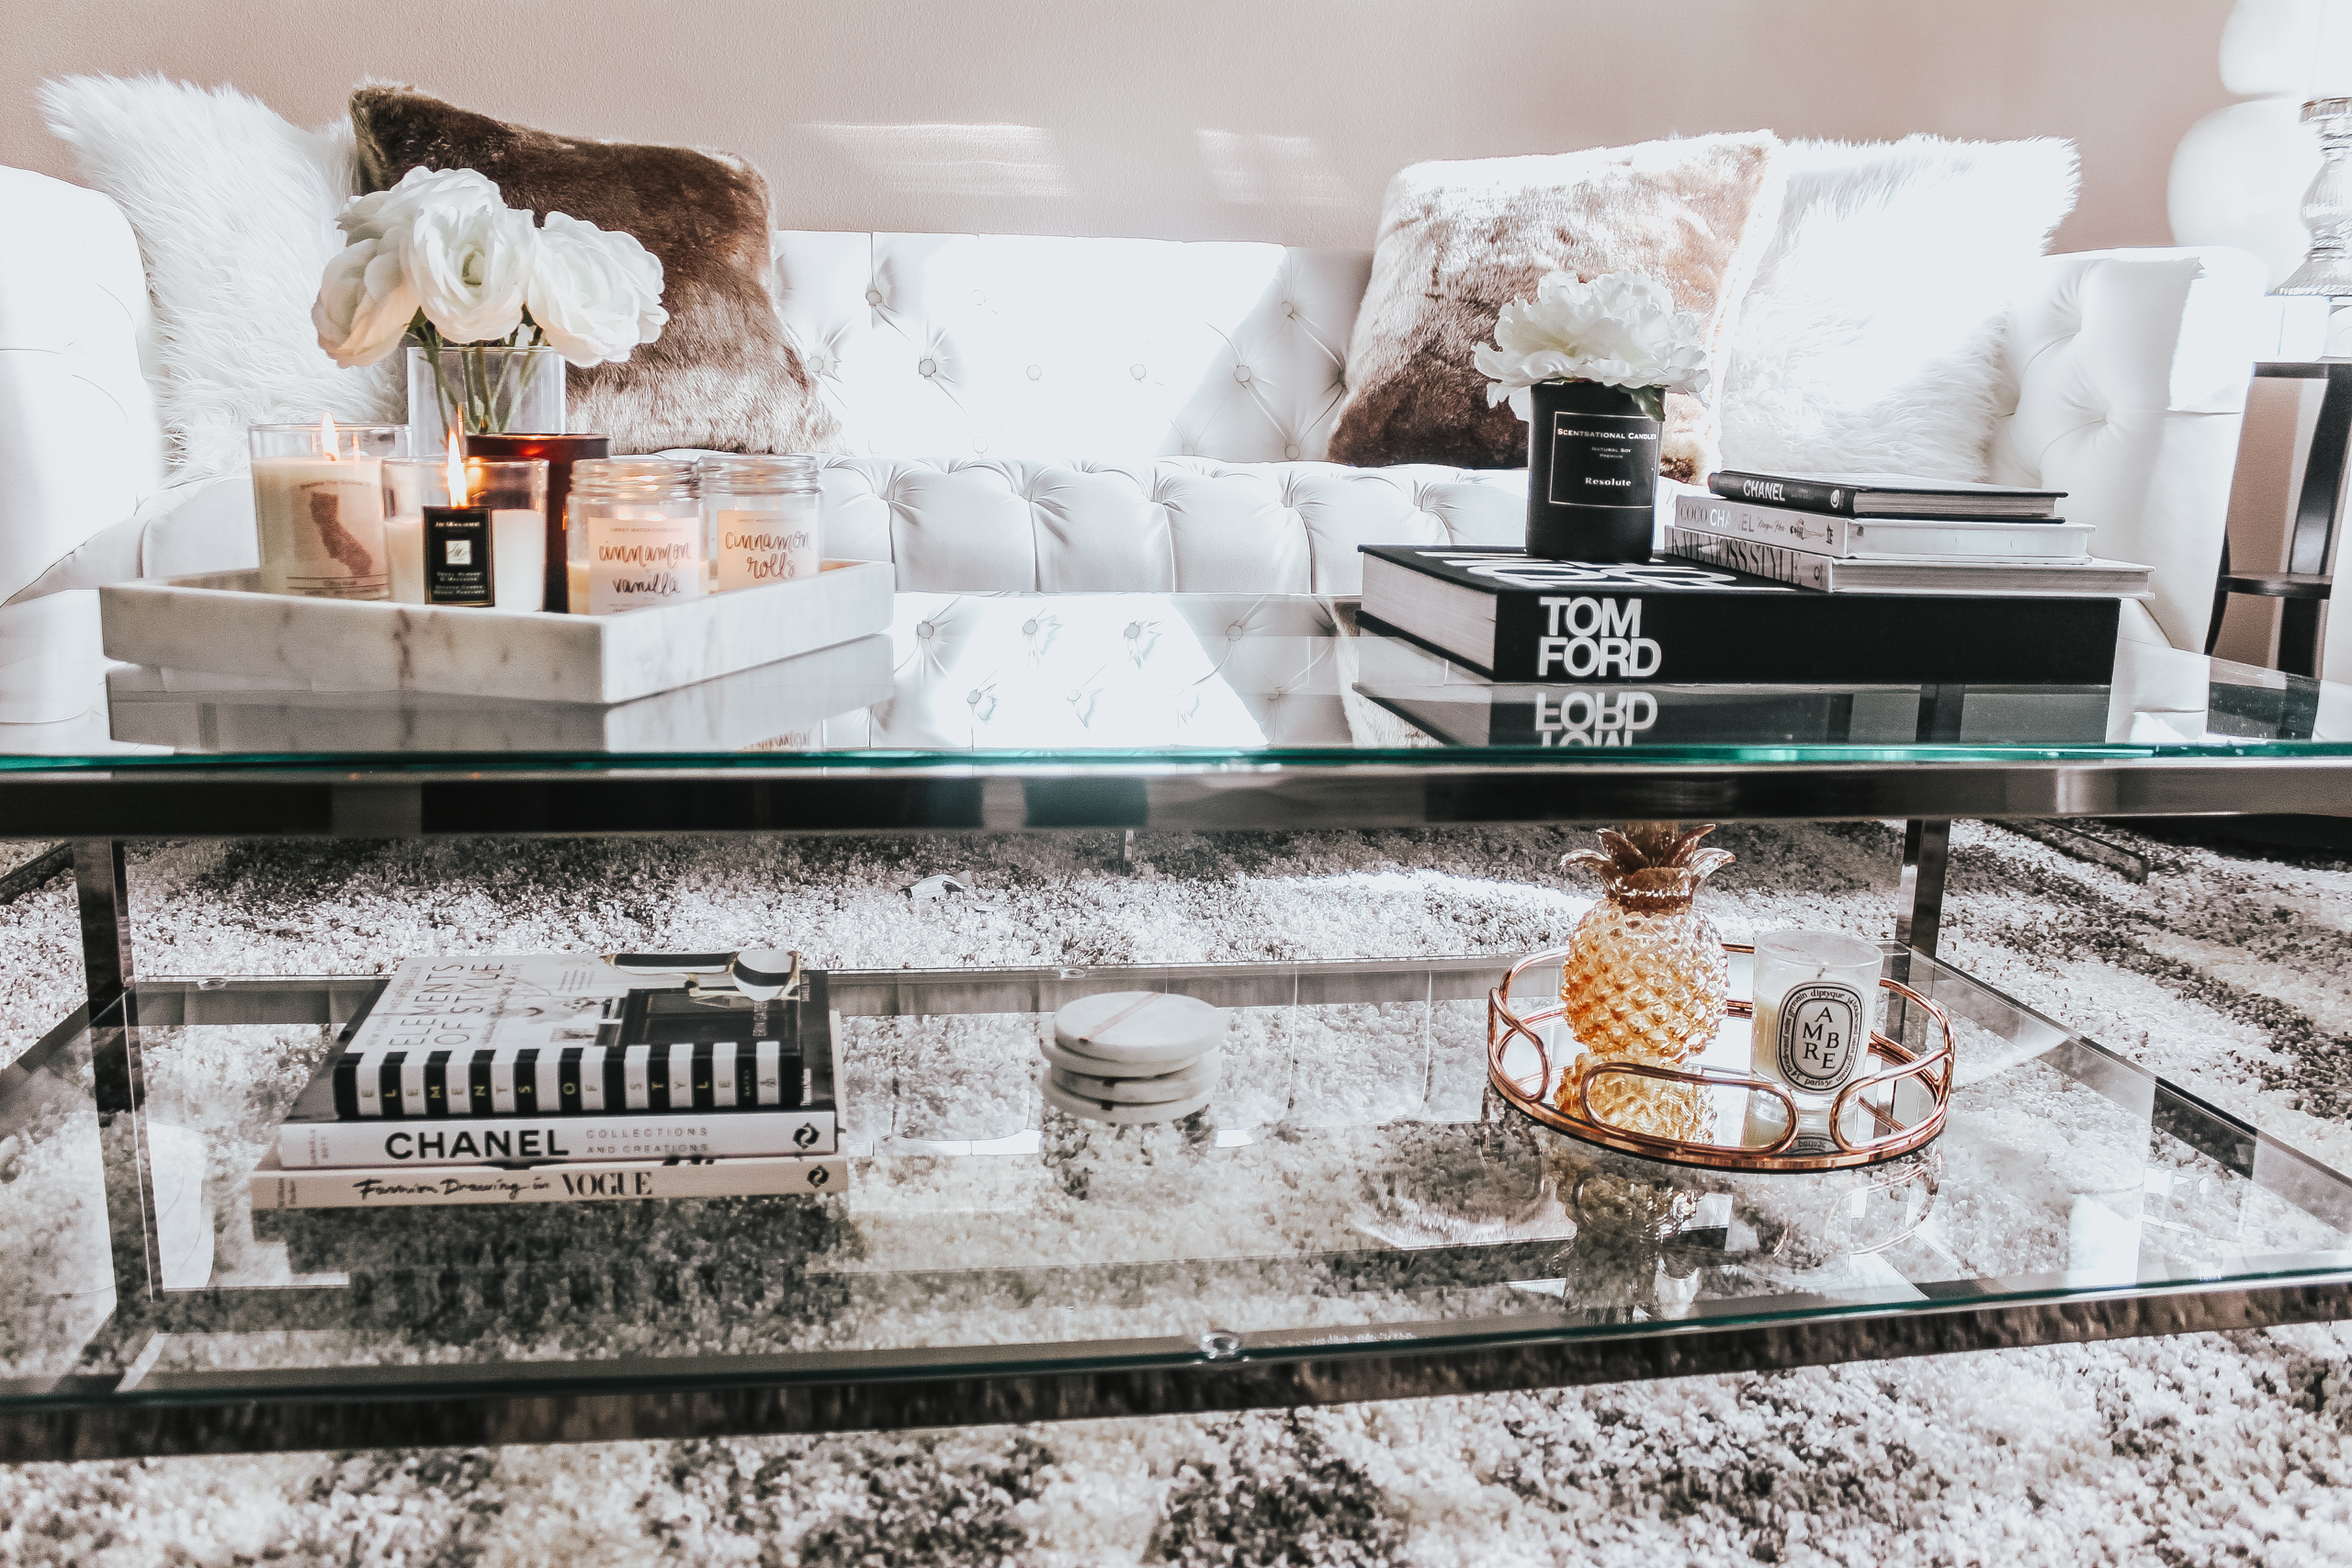 7 Tips For Styling Your Coffee Table | Coffee Table Styling | Coffee Table Books | Neutral Living Room | Home Decor | Blondie in the City by Hayley Larue